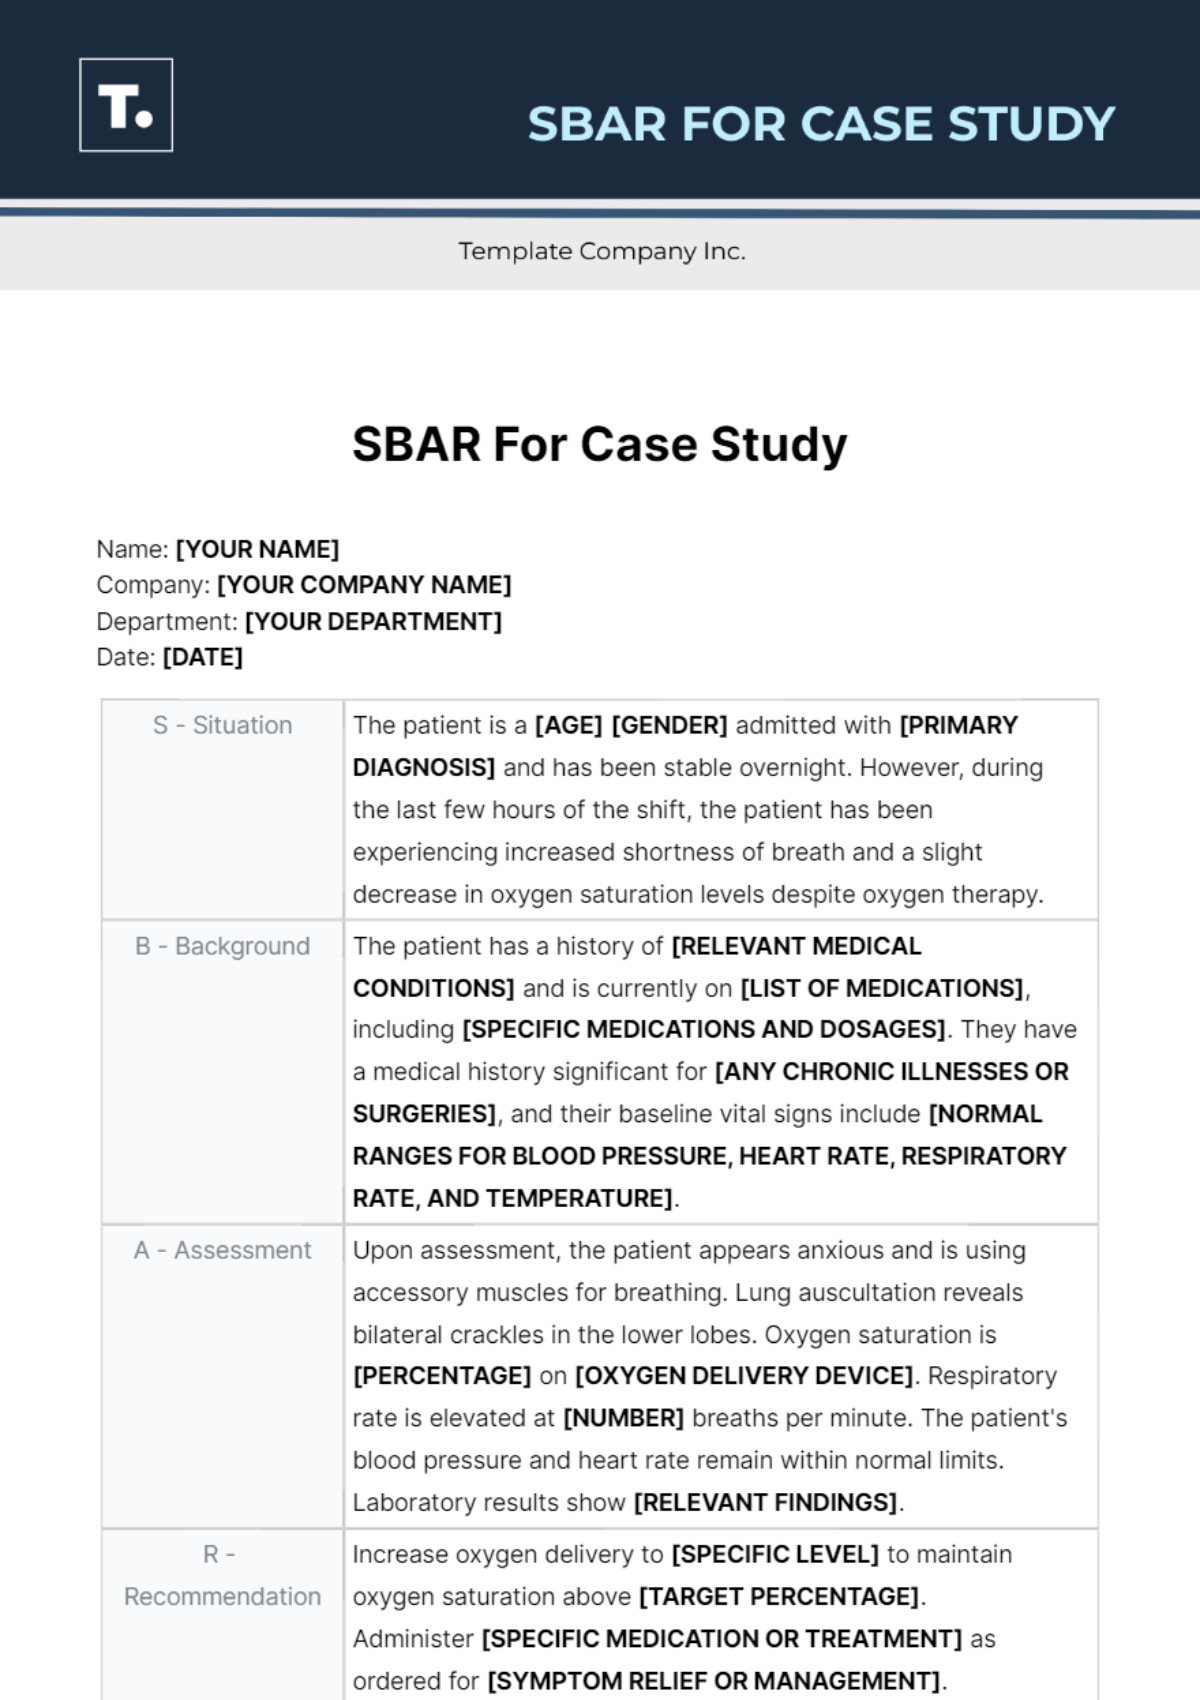 SBAR For Case Study Template